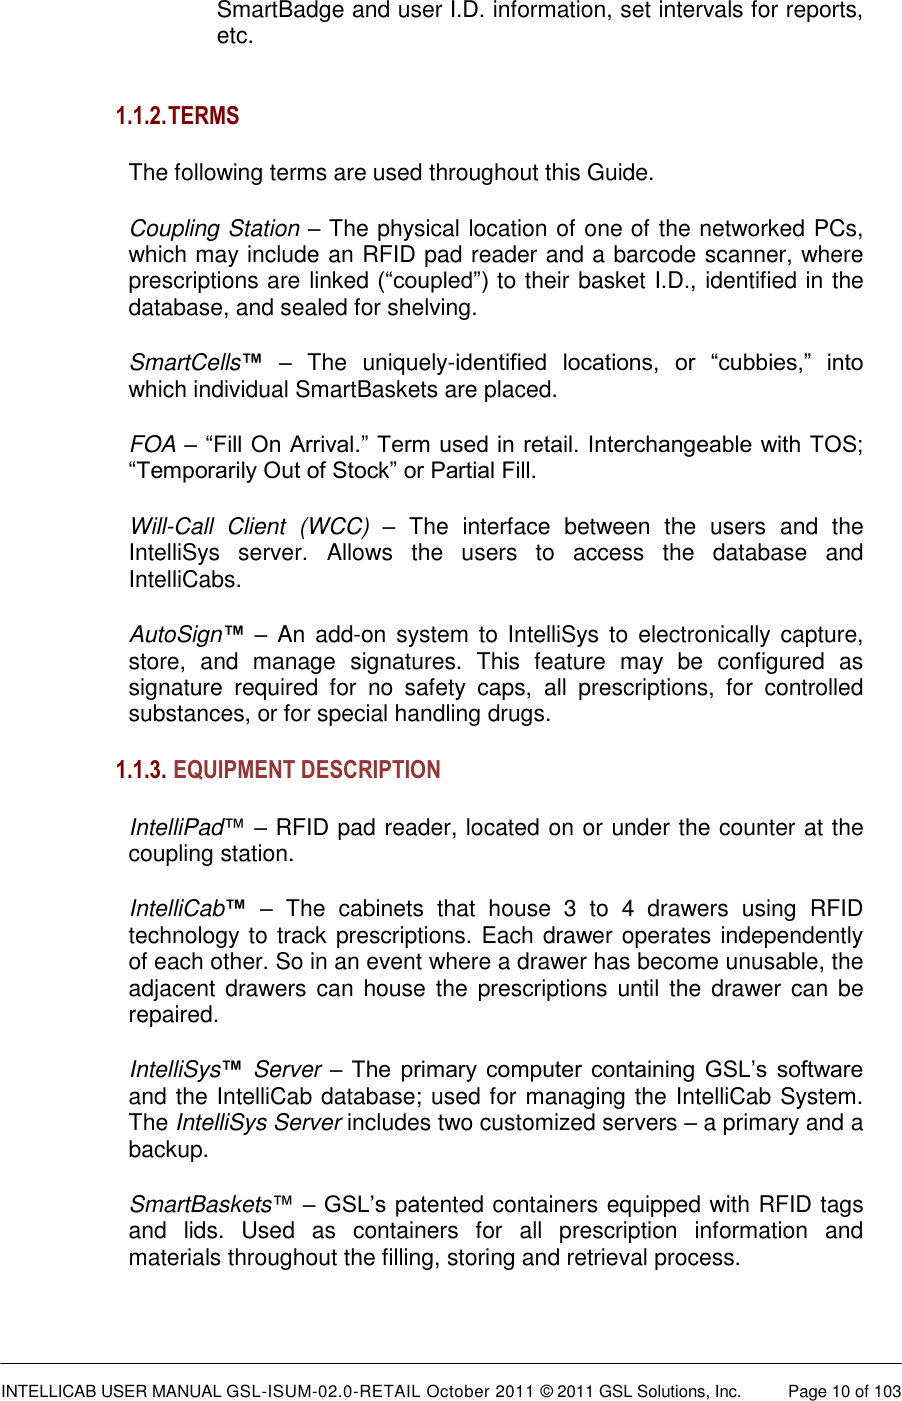  INTELLICAB USER MANUAL GSL-ISUM-02.0-RETAIL October 2011 © 2011 GSL Solutions, Inc.   Page 10 of 103   SmartBadge and user I.D. information, set intervals for reports, etc.   1.1.2. TERMS The following terms are used throughout this Guide. Coupling Station – The physical location of one of the networked PCs, which may include an RFID pad reader and a barcode scanner, where prescriptions are linked (“coupled”) to their basket I.D., identified in the database, and sealed for shelving. SmartCells™ –  The  uniquely-identified  locations,  or  “cubbies,”  into which individual SmartBaskets are placed. FOA – “Fill On Arrival.” Term used in retail. Interchangeable with TOS; “Temporarily Out of Stock” or Partial Fill. Will-Call  Client  (WCC) –  The  interface  between  the  users  and  the IntelliSys  server.  Allows  the  users  to  access  the  database  and IntelliCabs. AutoSign™ – An  add-on system to  IntelliSys to  electronically capture, store,  and  manage  signatures.  This  feature  may  be  configured  as signature  required  for  no  safety  caps,  all  prescriptions,  for  controlled substances, or for special handling drugs.  1.1.3.  EQUIPMENT DESCRIPTION  IntelliPad™ – RFID pad reader, located on or under the counter at the coupling station. IntelliCab™ –  The  cabinets  that  house  3  to  4  drawers  using  RFID technology to track prescriptions. Each drawer operates independently of each other. So in an event where a drawer has become unusable, the adjacent drawers can  house the  prescriptions until the  drawer  can be repaired.  IntelliSys™ Server – The primary  computer containing  GSL’s  software and the IntelliCab database; used for managing the IntelliCab System. The IntelliSys Server includes two customized servers – a primary and a backup. SmartBaskets™ – GSL’s patented containers equipped with RFID tags and  lids.  Used  as  containers  for  all  prescription  information  and materials throughout the filling, storing and retrieval process. 